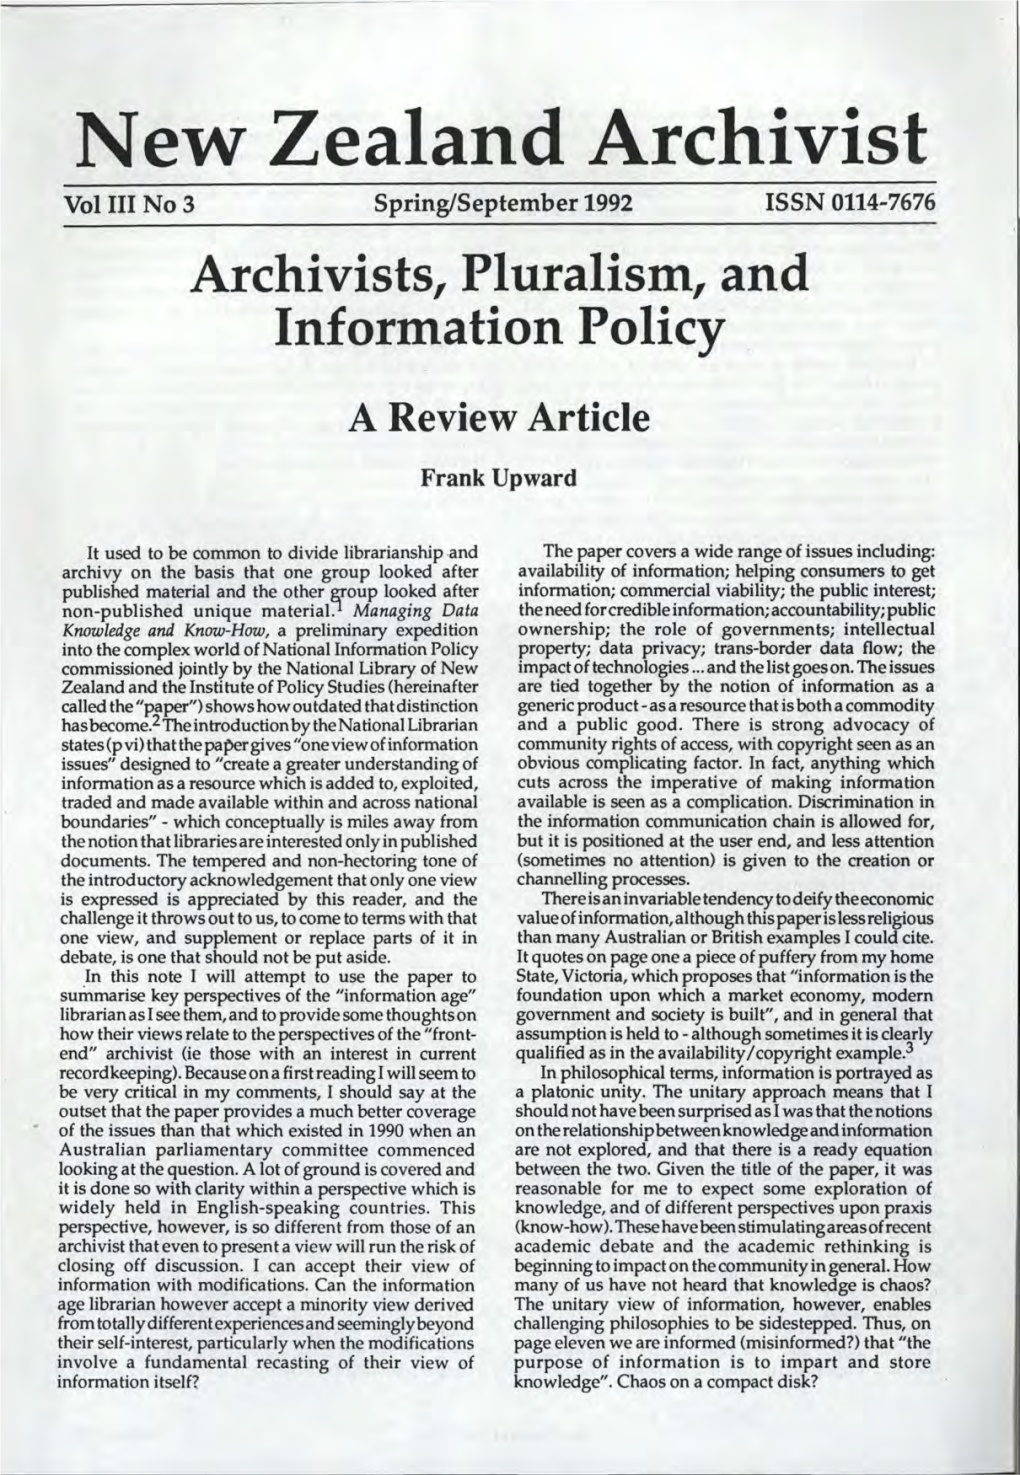 New Zealand Archivist Vol III No 3 Spring/September 1992 ISSN 0114-7676 Archivists, Pluralism, and Information Policy a Review Article Frank Upward